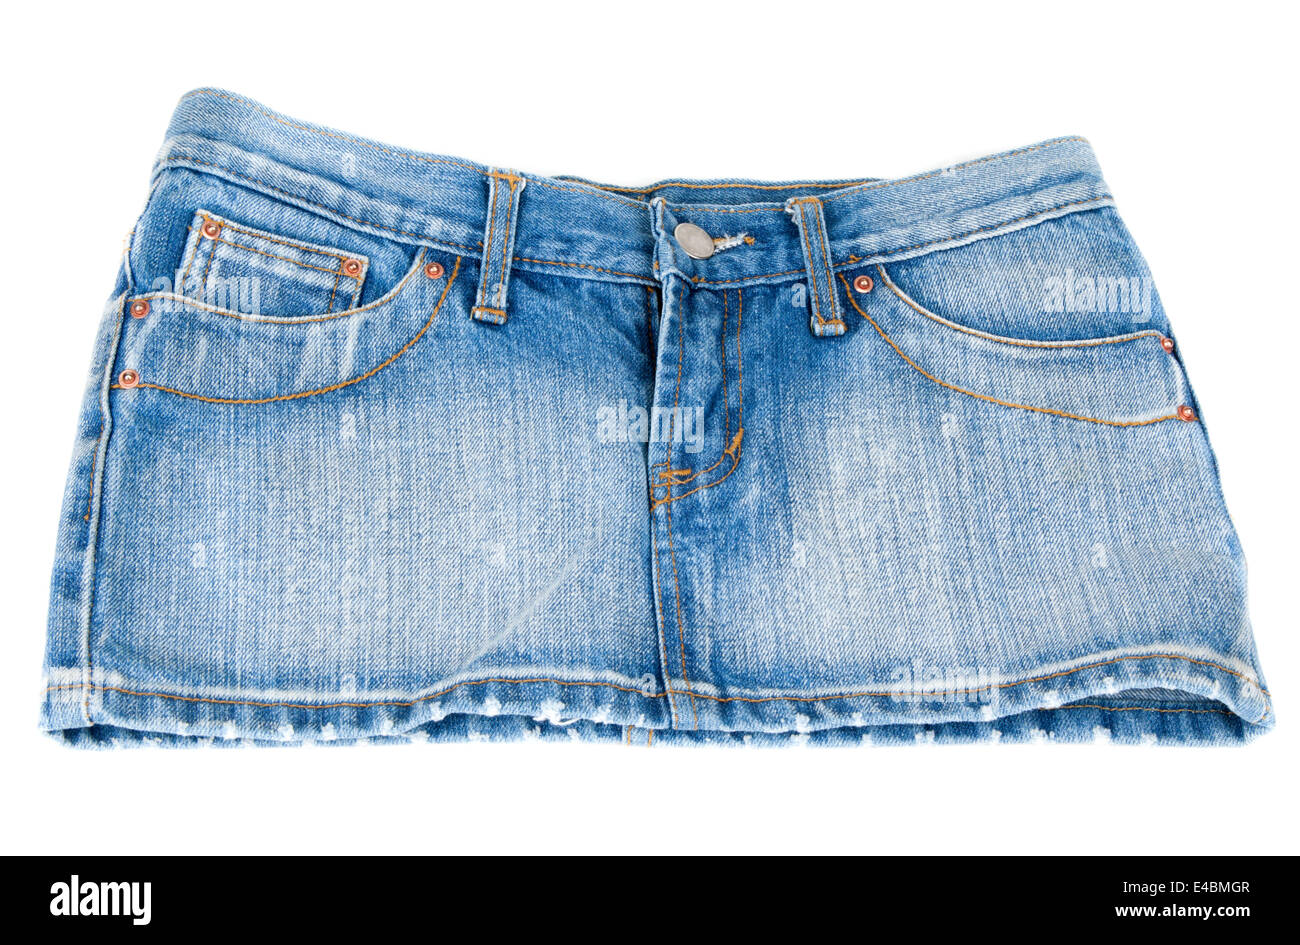 Jeans mini skirt Cut Out Stock Images & Pictures - Alamy